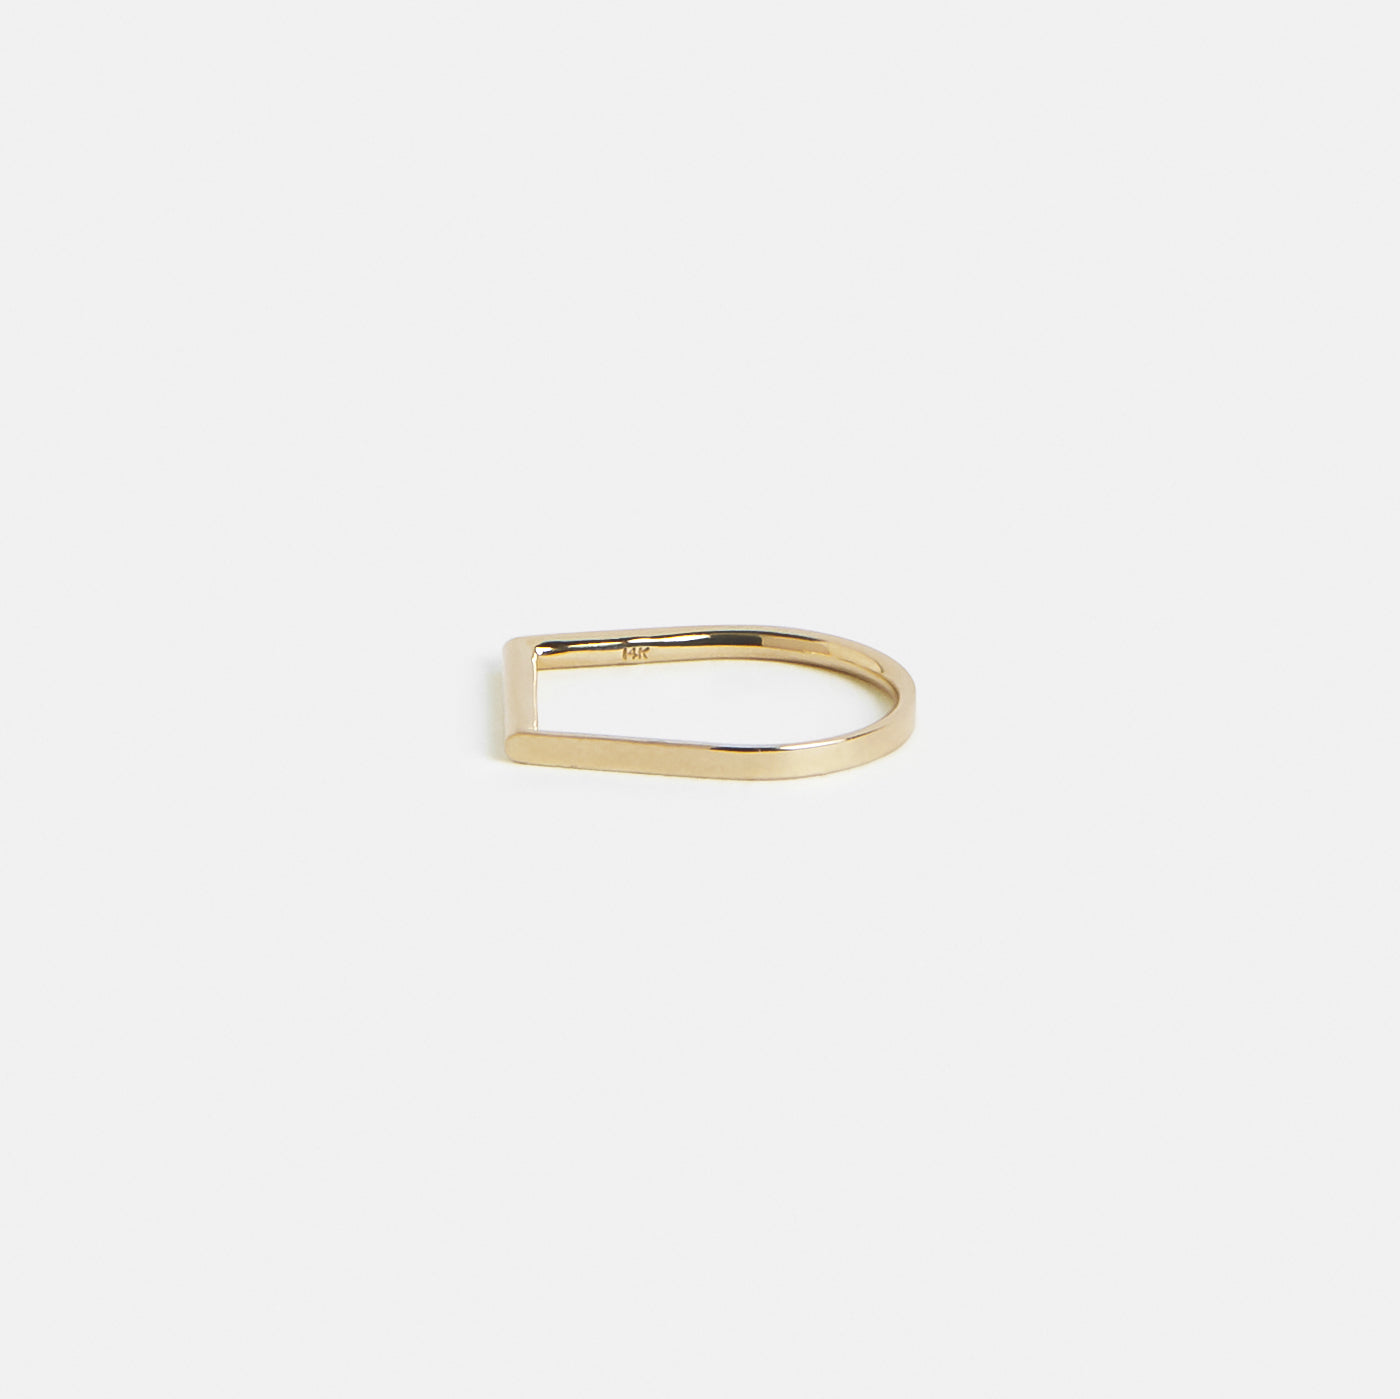 Lina Unconventional Ring in 14k Gold By SHW Fine Jewelry NYC